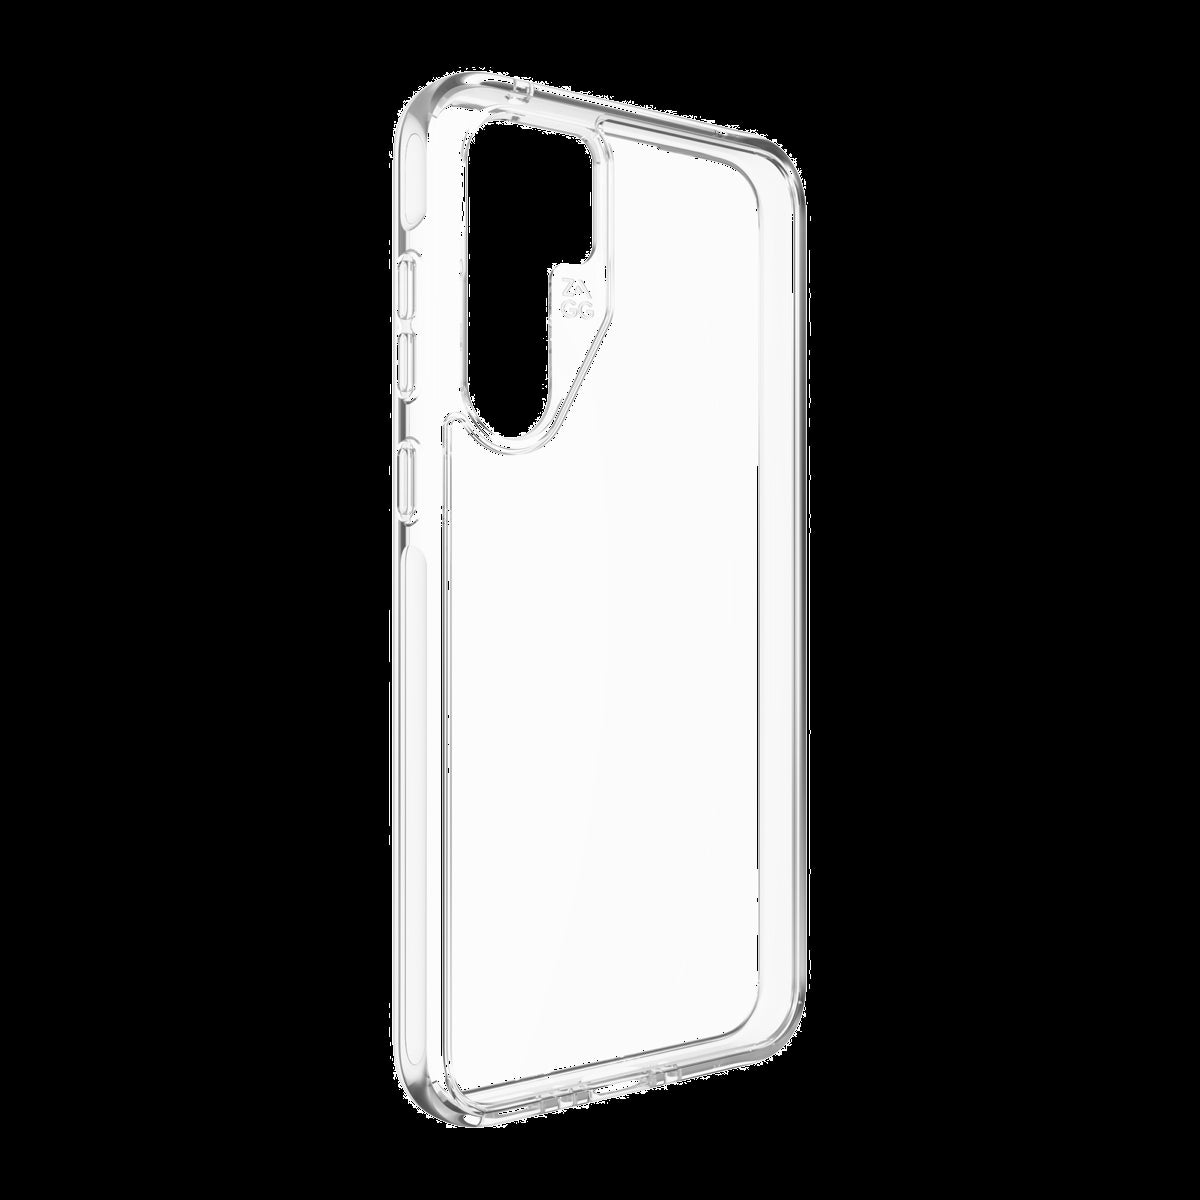 Strengthened with Graphene, ZAGG's Crystal Palace series case combines an ultra-slim, crystal-clear profile with up to 13 ft of drop protection.